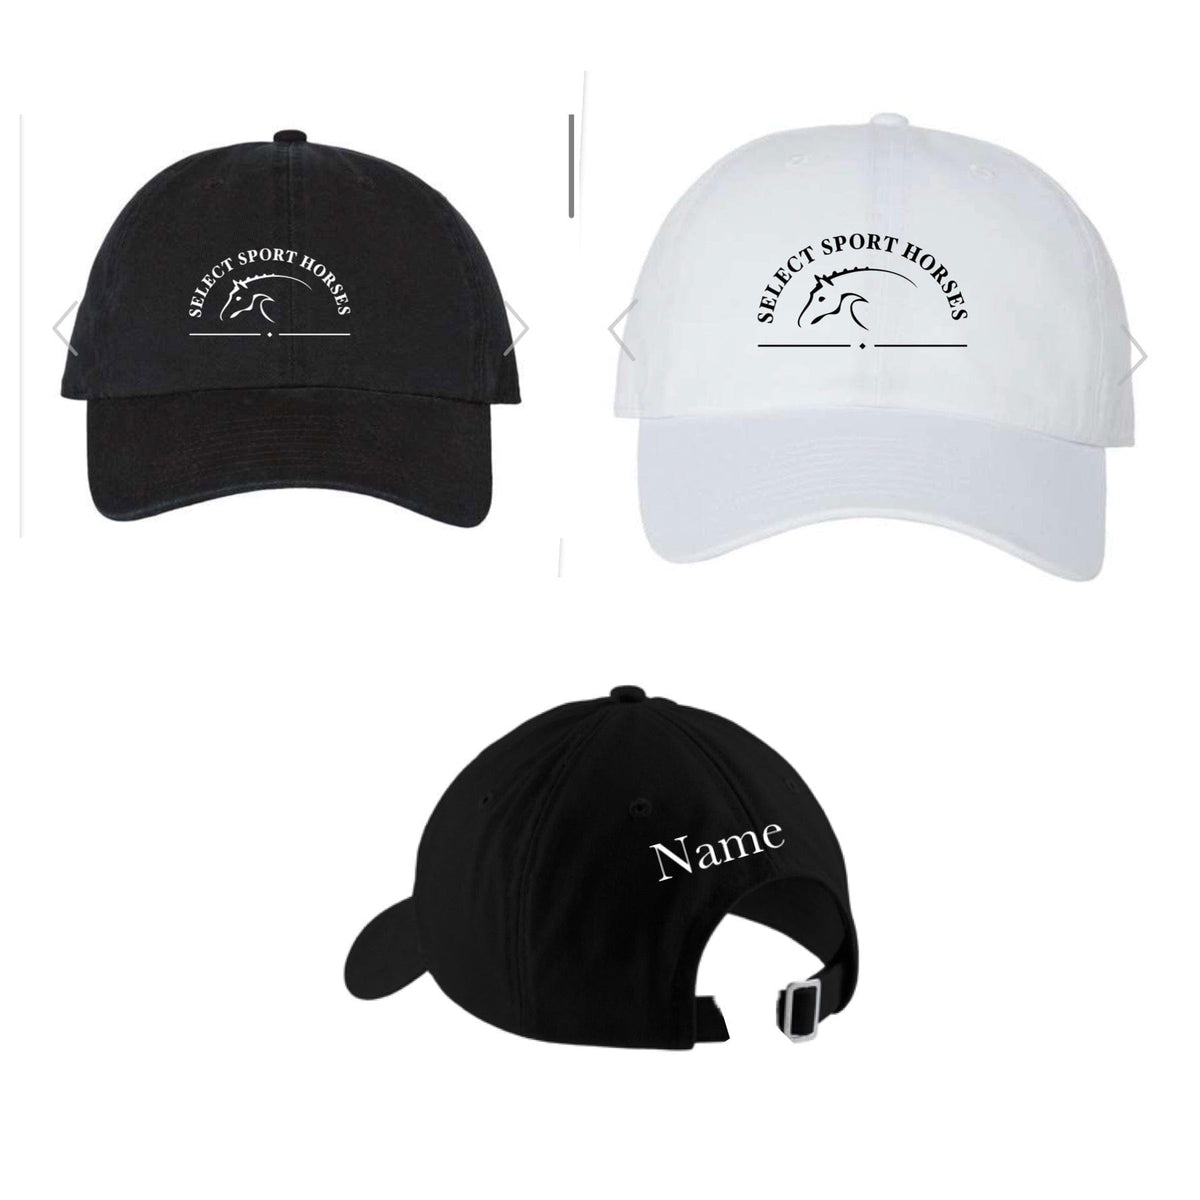 Equestrian Team Apparel Select Sport Horses Baseball Cap equestrian team apparel online tack store mobile tack store custom farm apparel custom show stable clothing equestrian lifestyle horse show clothing riding clothes horses equestrian tack store